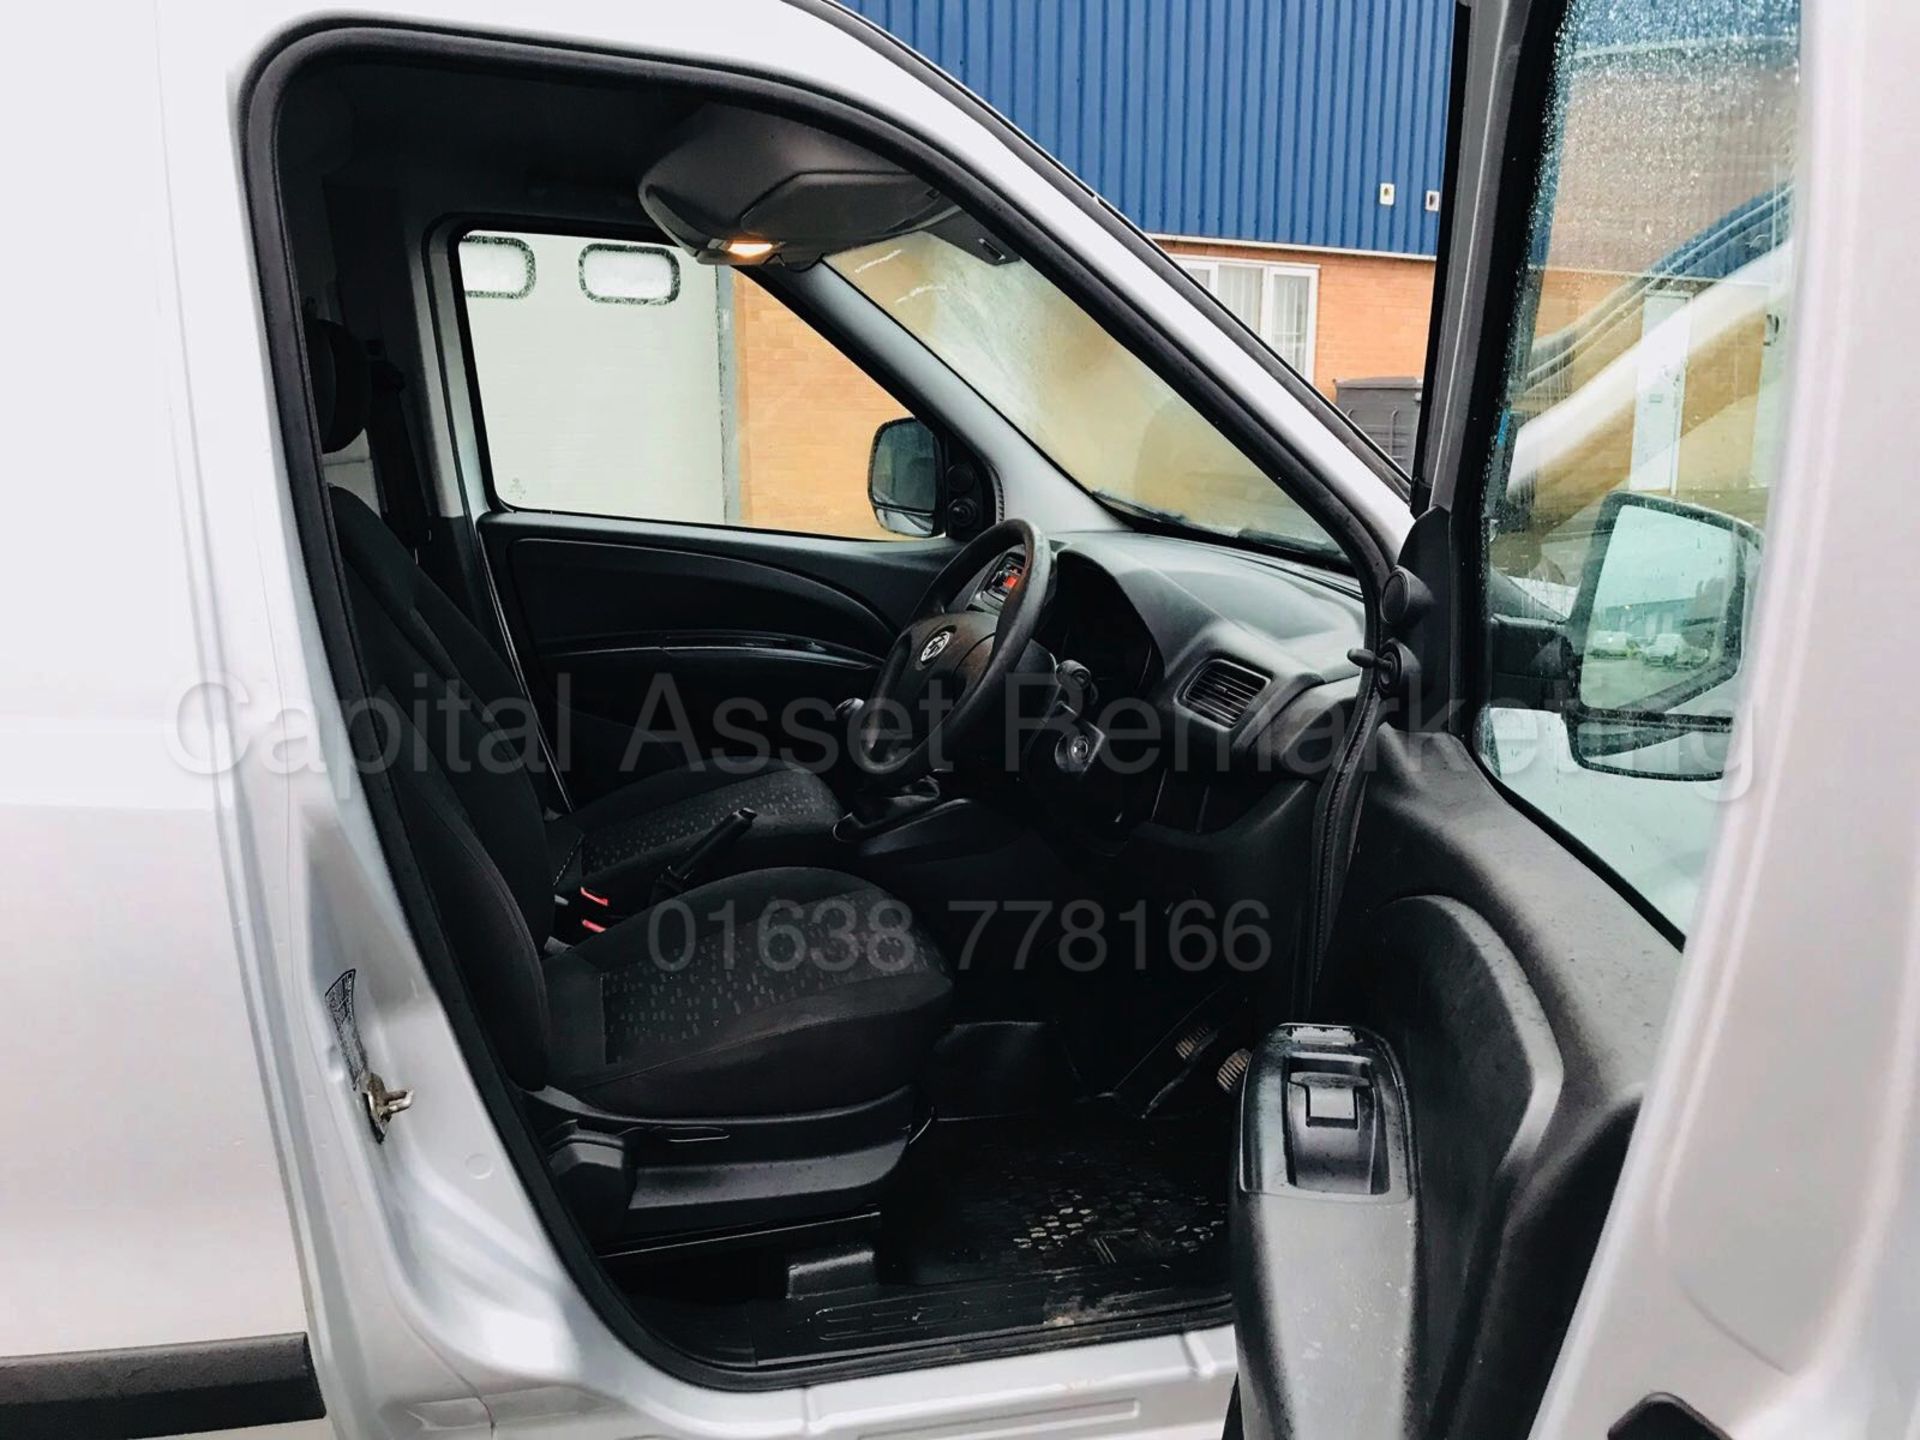 VAUXHALL COMBO 2000 L1H1 'SPORTIVE' (2015 MODEL) 'CDTI - 90 BHP' **AIR CON** (1 OWNER FROM NEW) - Image 11 of 19